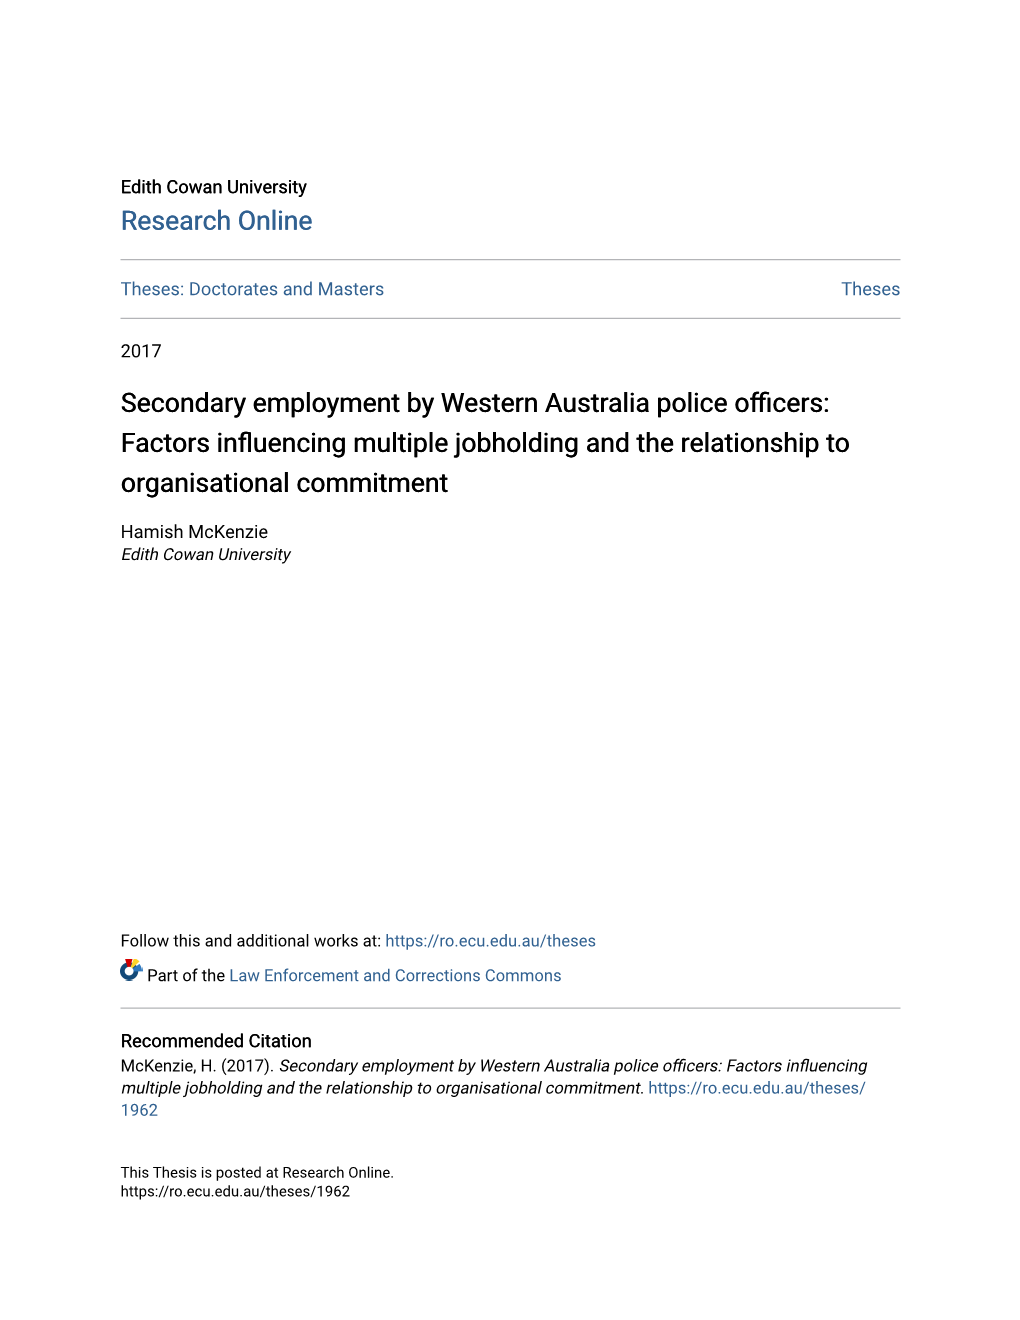 Secondary Employment by Western Australia Police Officers: Factors Influencing Multiple Jobholding and the Elationshipr to Organisational Commitment